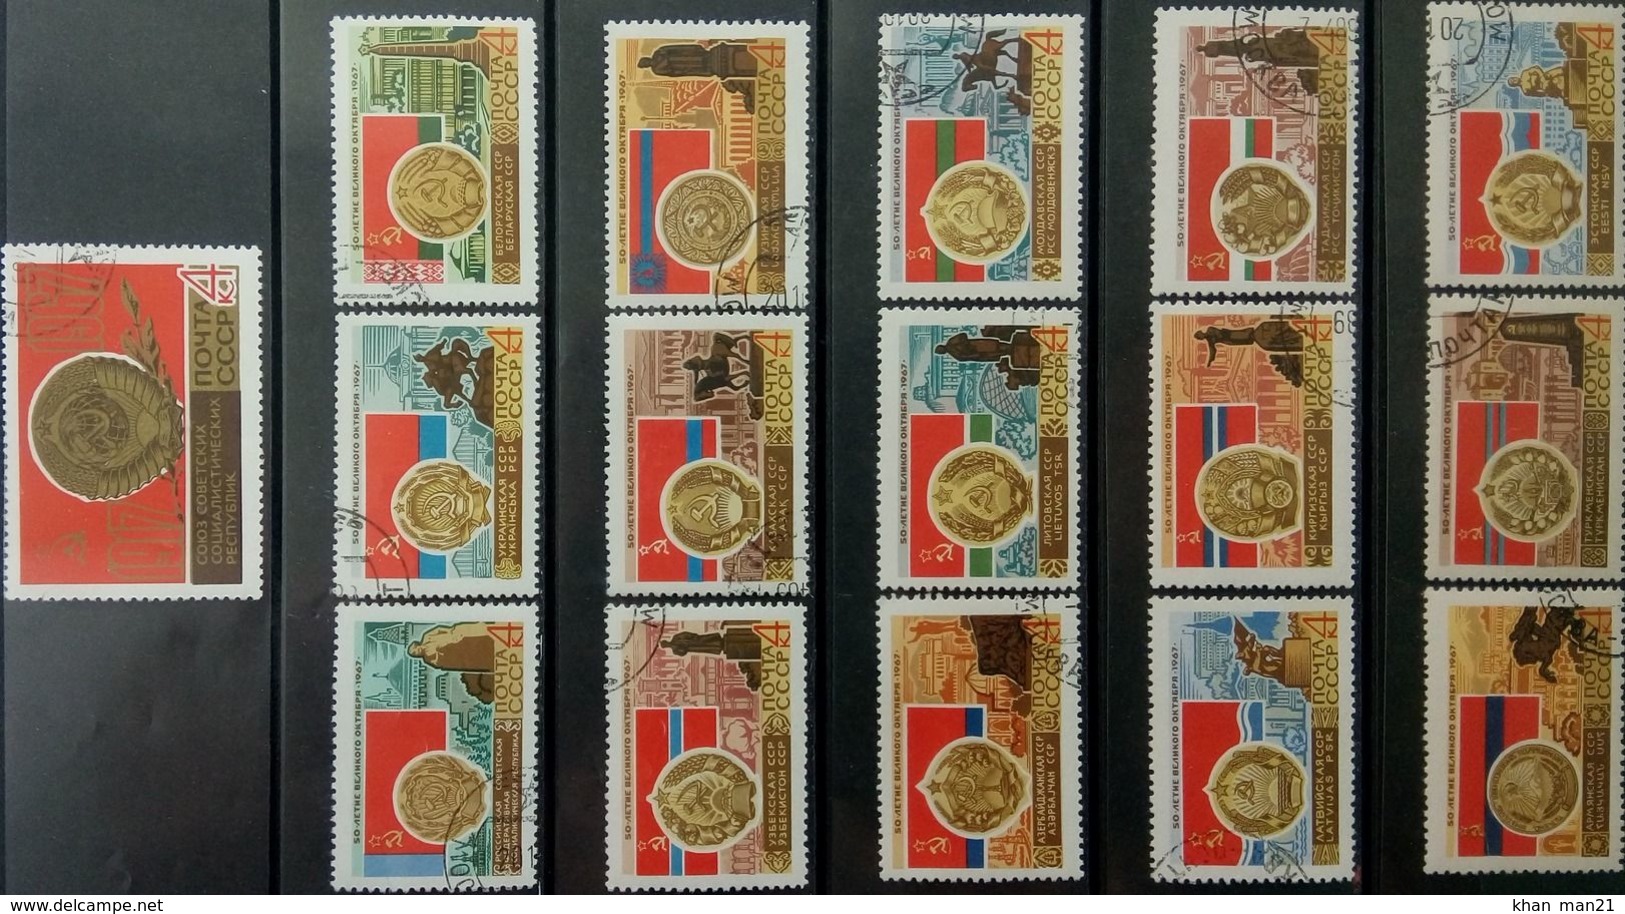 Russia, USSR, 1967, Mi. 3362-77, Sc. 3342-57, SG 3433-48, 50th Anniv Of October Revolution, Used, CTO - Used Stamps